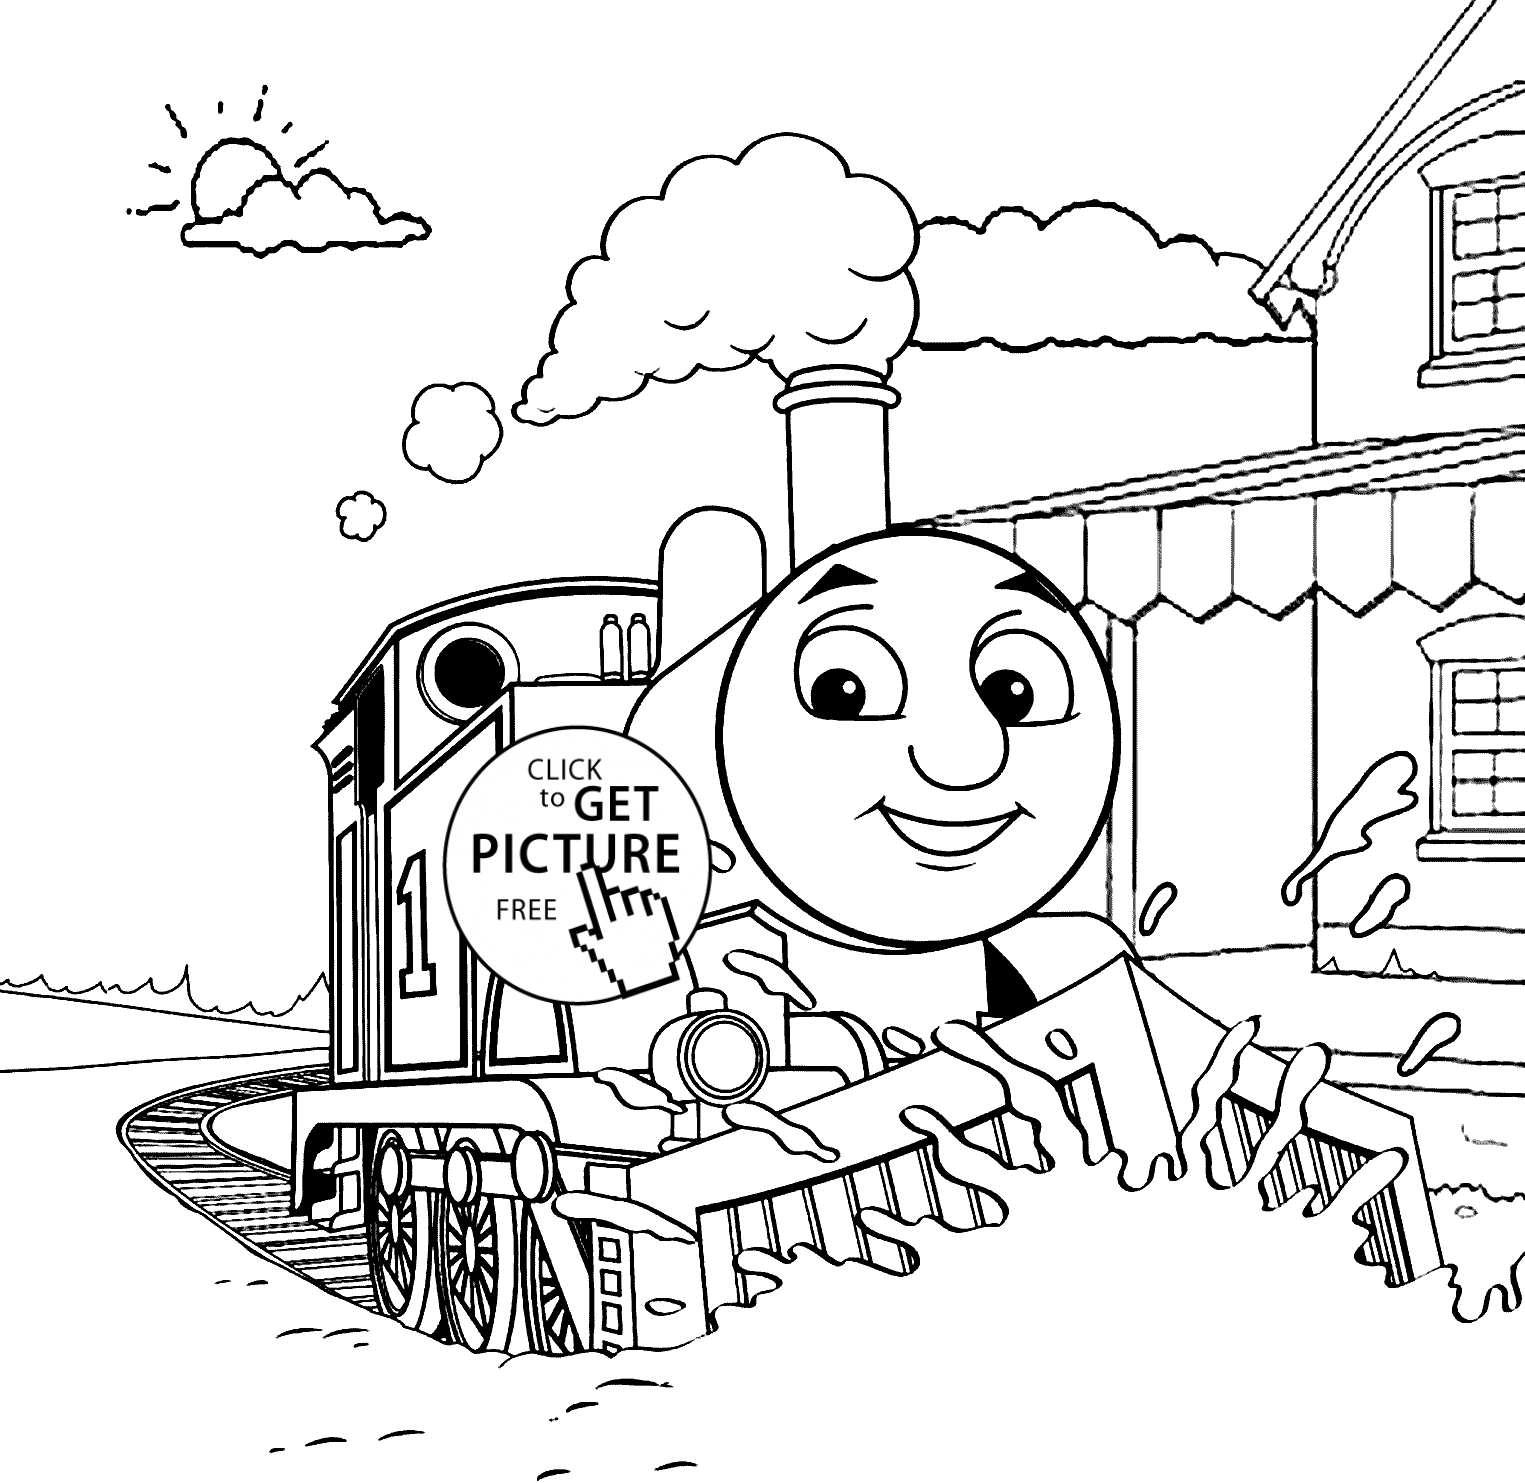 thomas and friends coloring pages gordon from thomas friends coloring page free friends pages coloring thomas and 